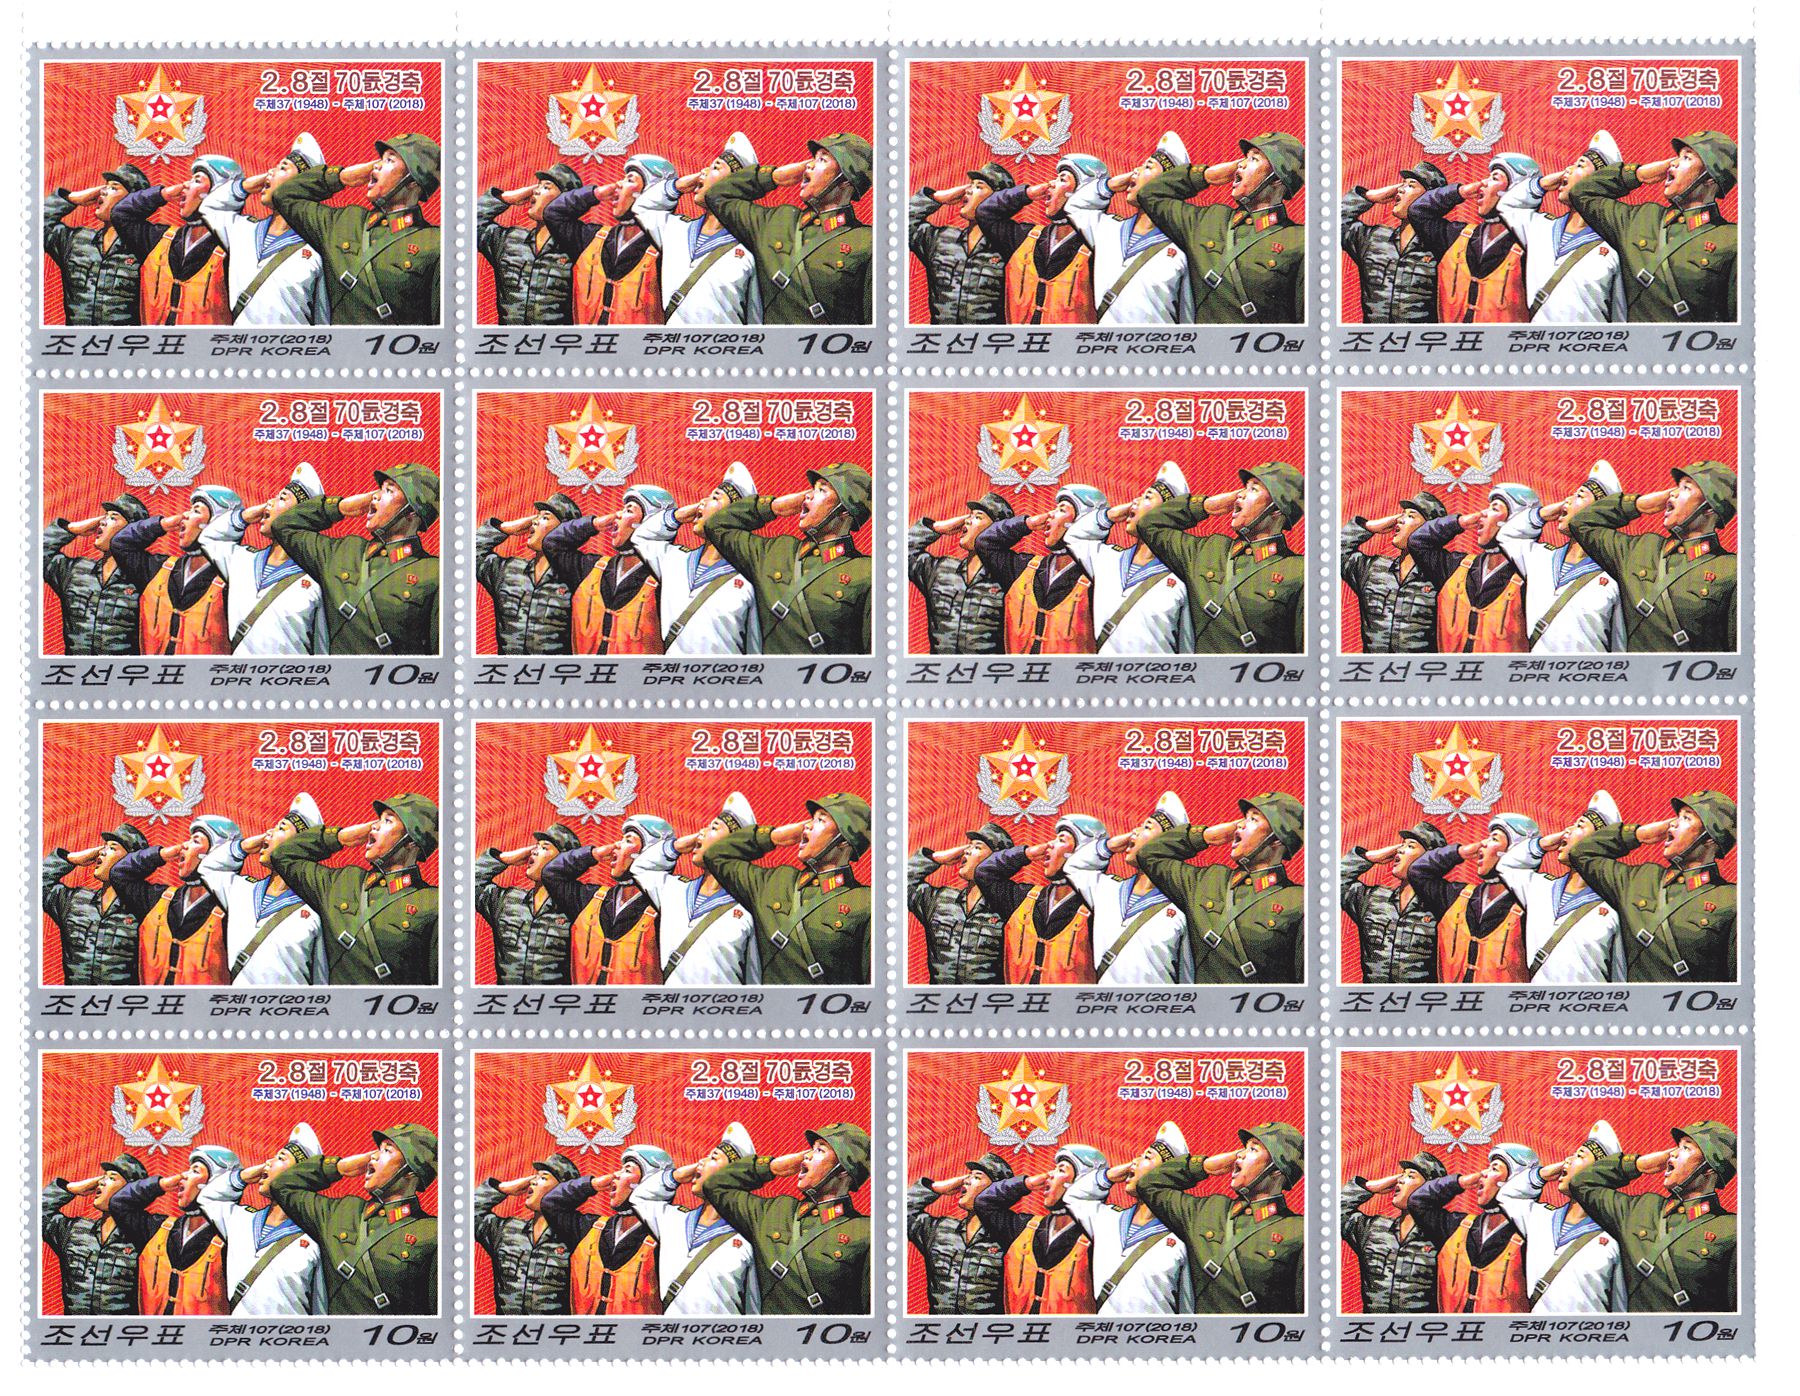 L4622, Korea "70th Anni of People's Army", Sheet of 16 Pcs Stamps, 2018